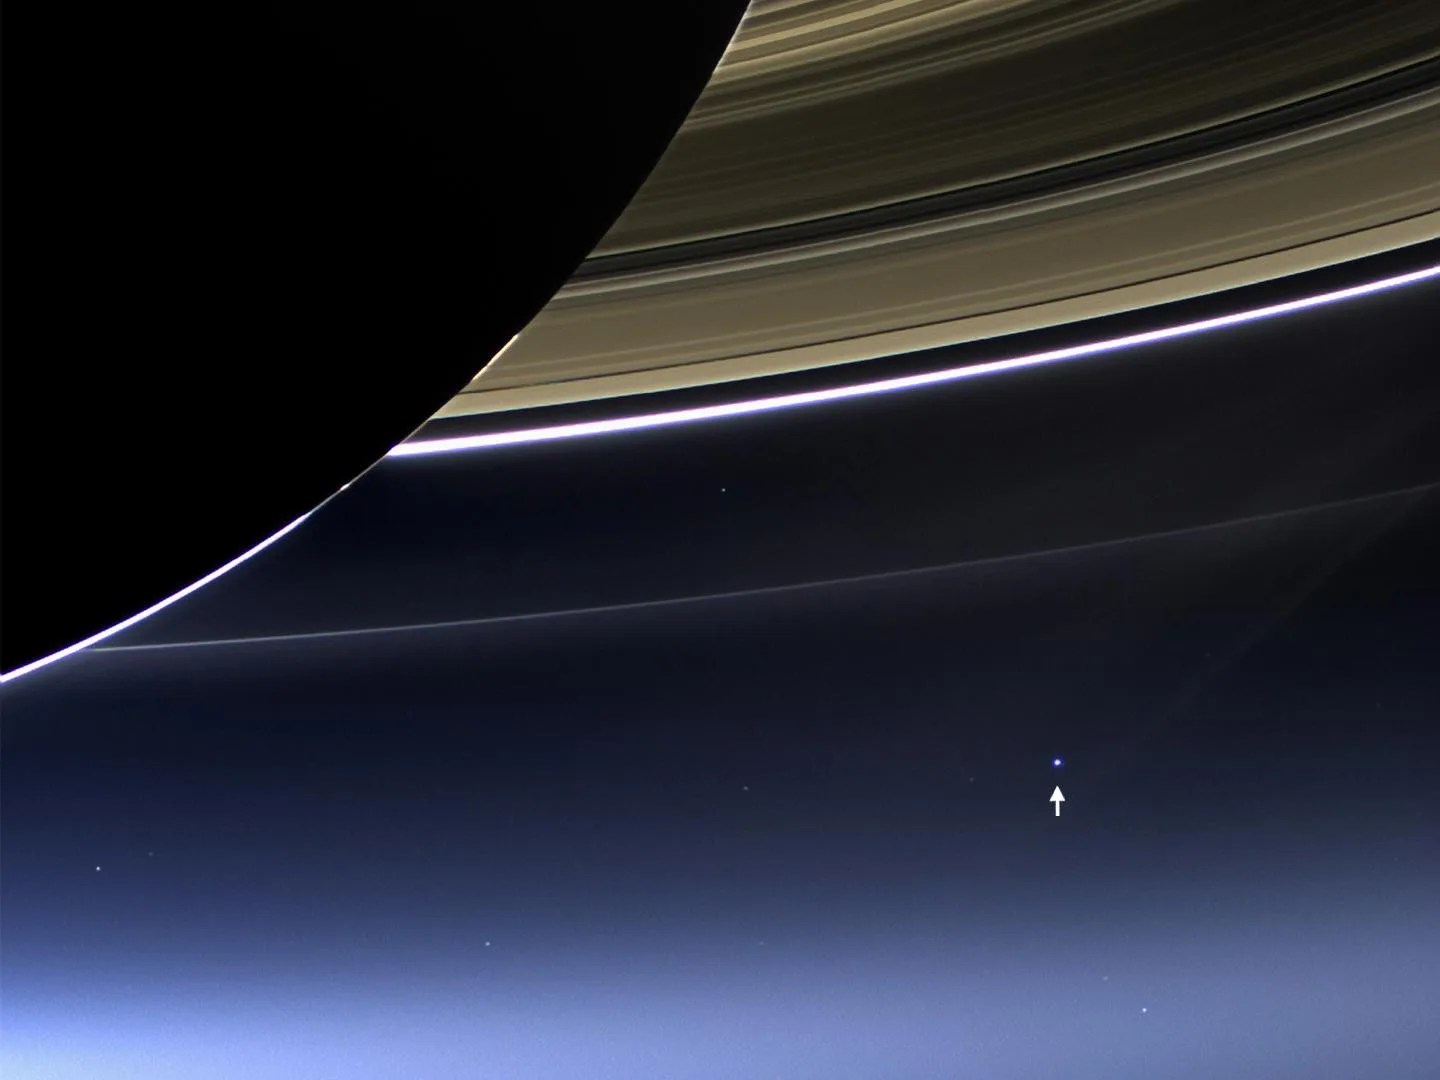 Earth and Saturn